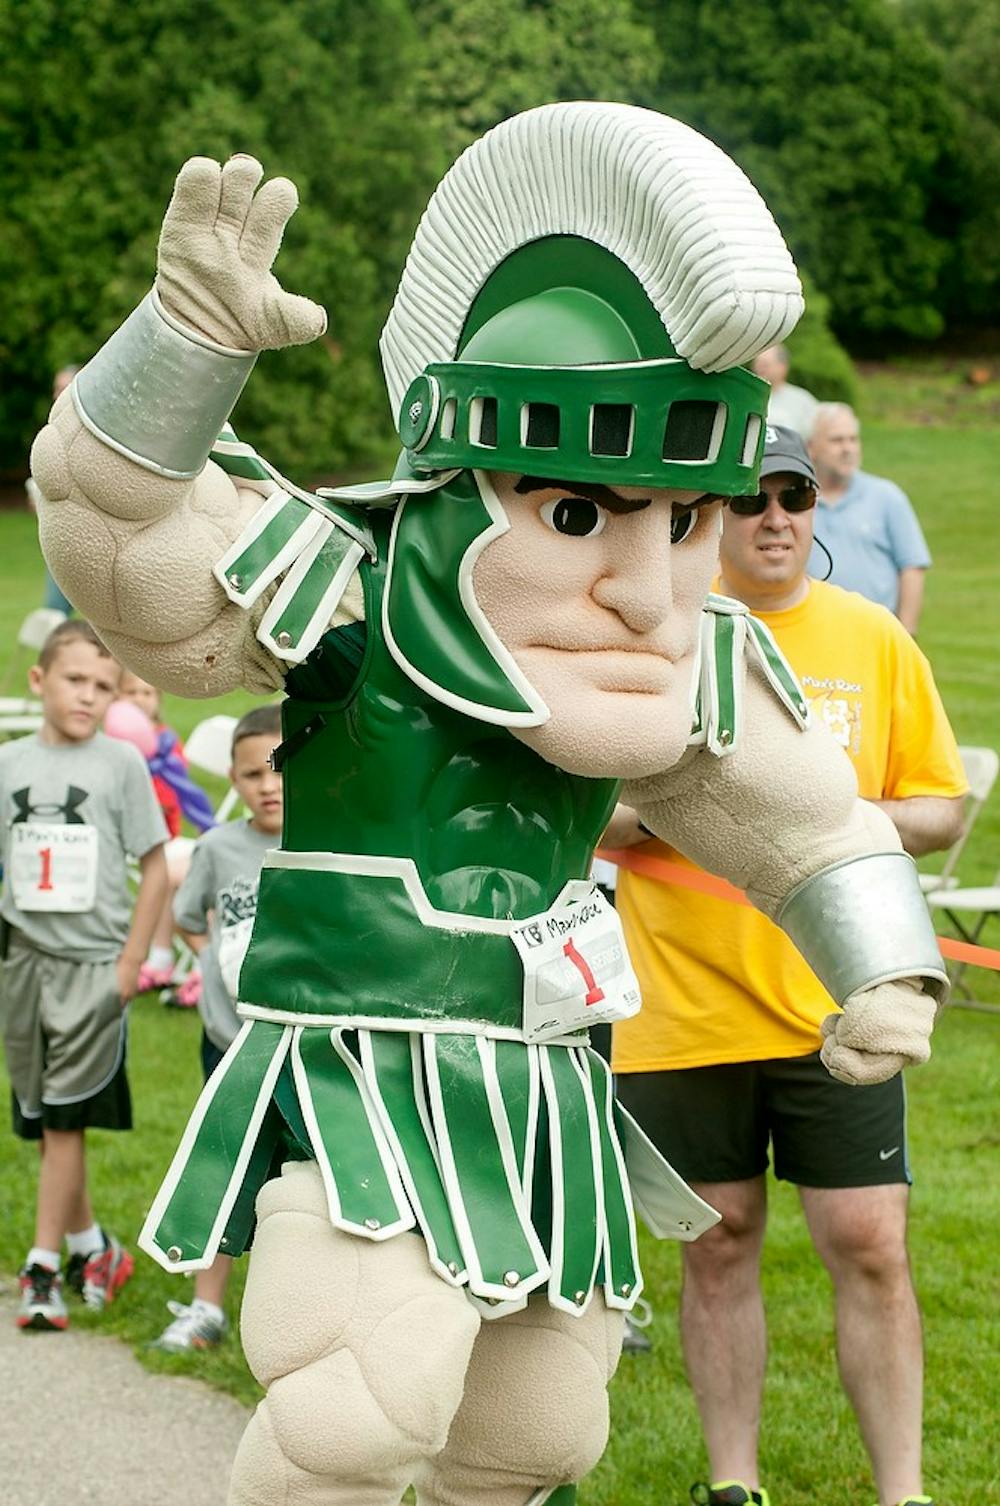 <p>MSU mascot Sparty gets ready to give a high five during the ninth annual Max’s race 5K on June 29, 2013, outside the Auditorium.</p>